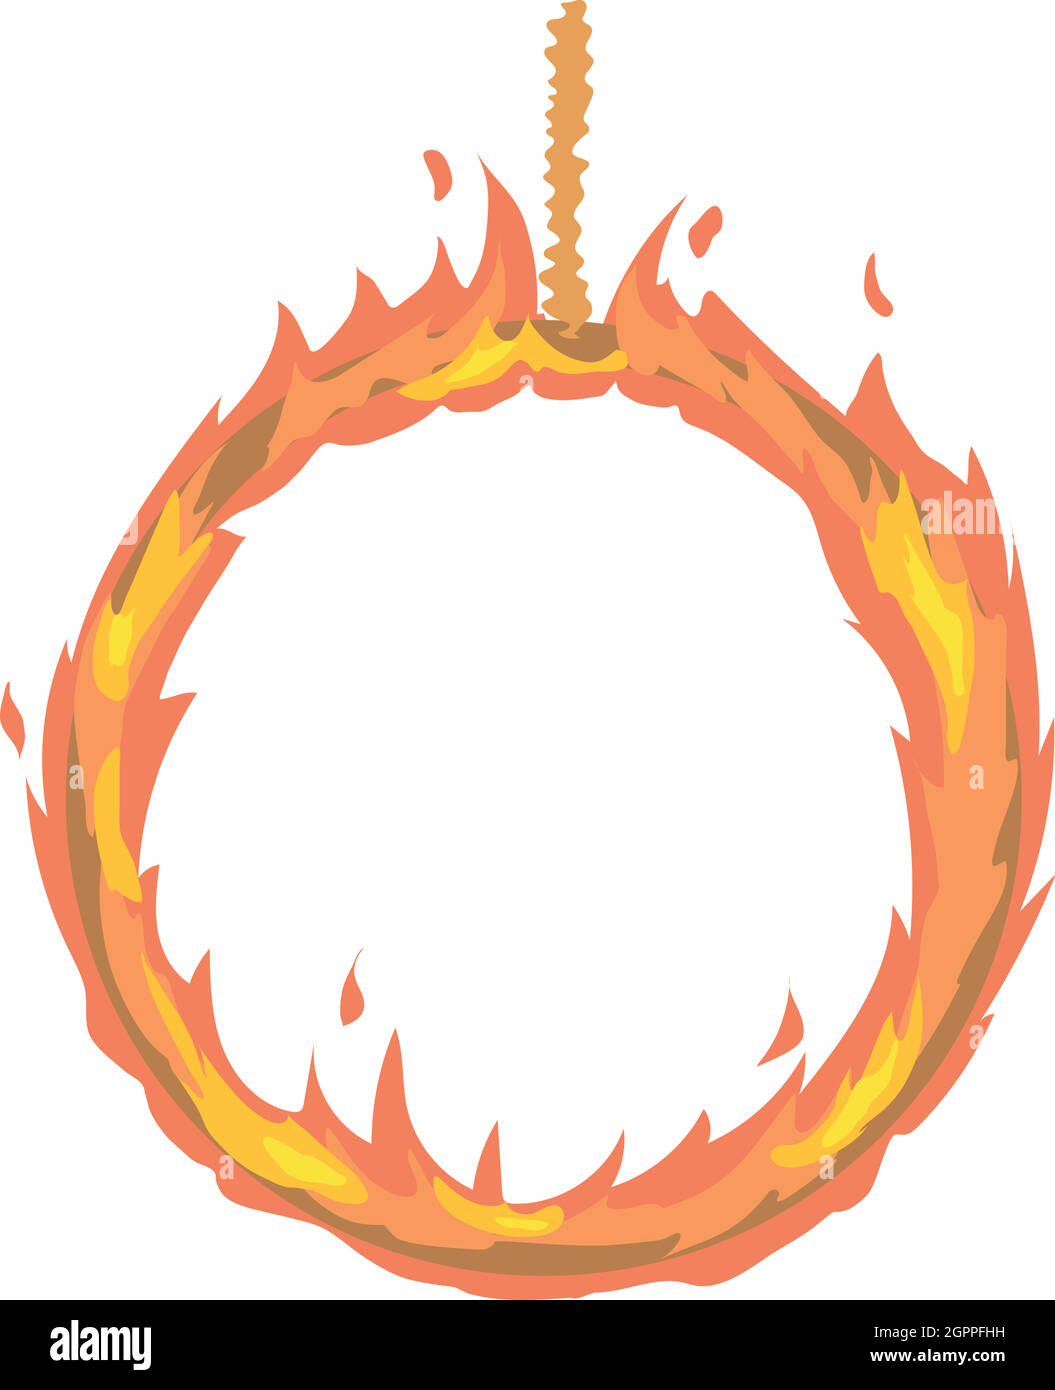 Ring of fire icon, cartoon style Stock Vector